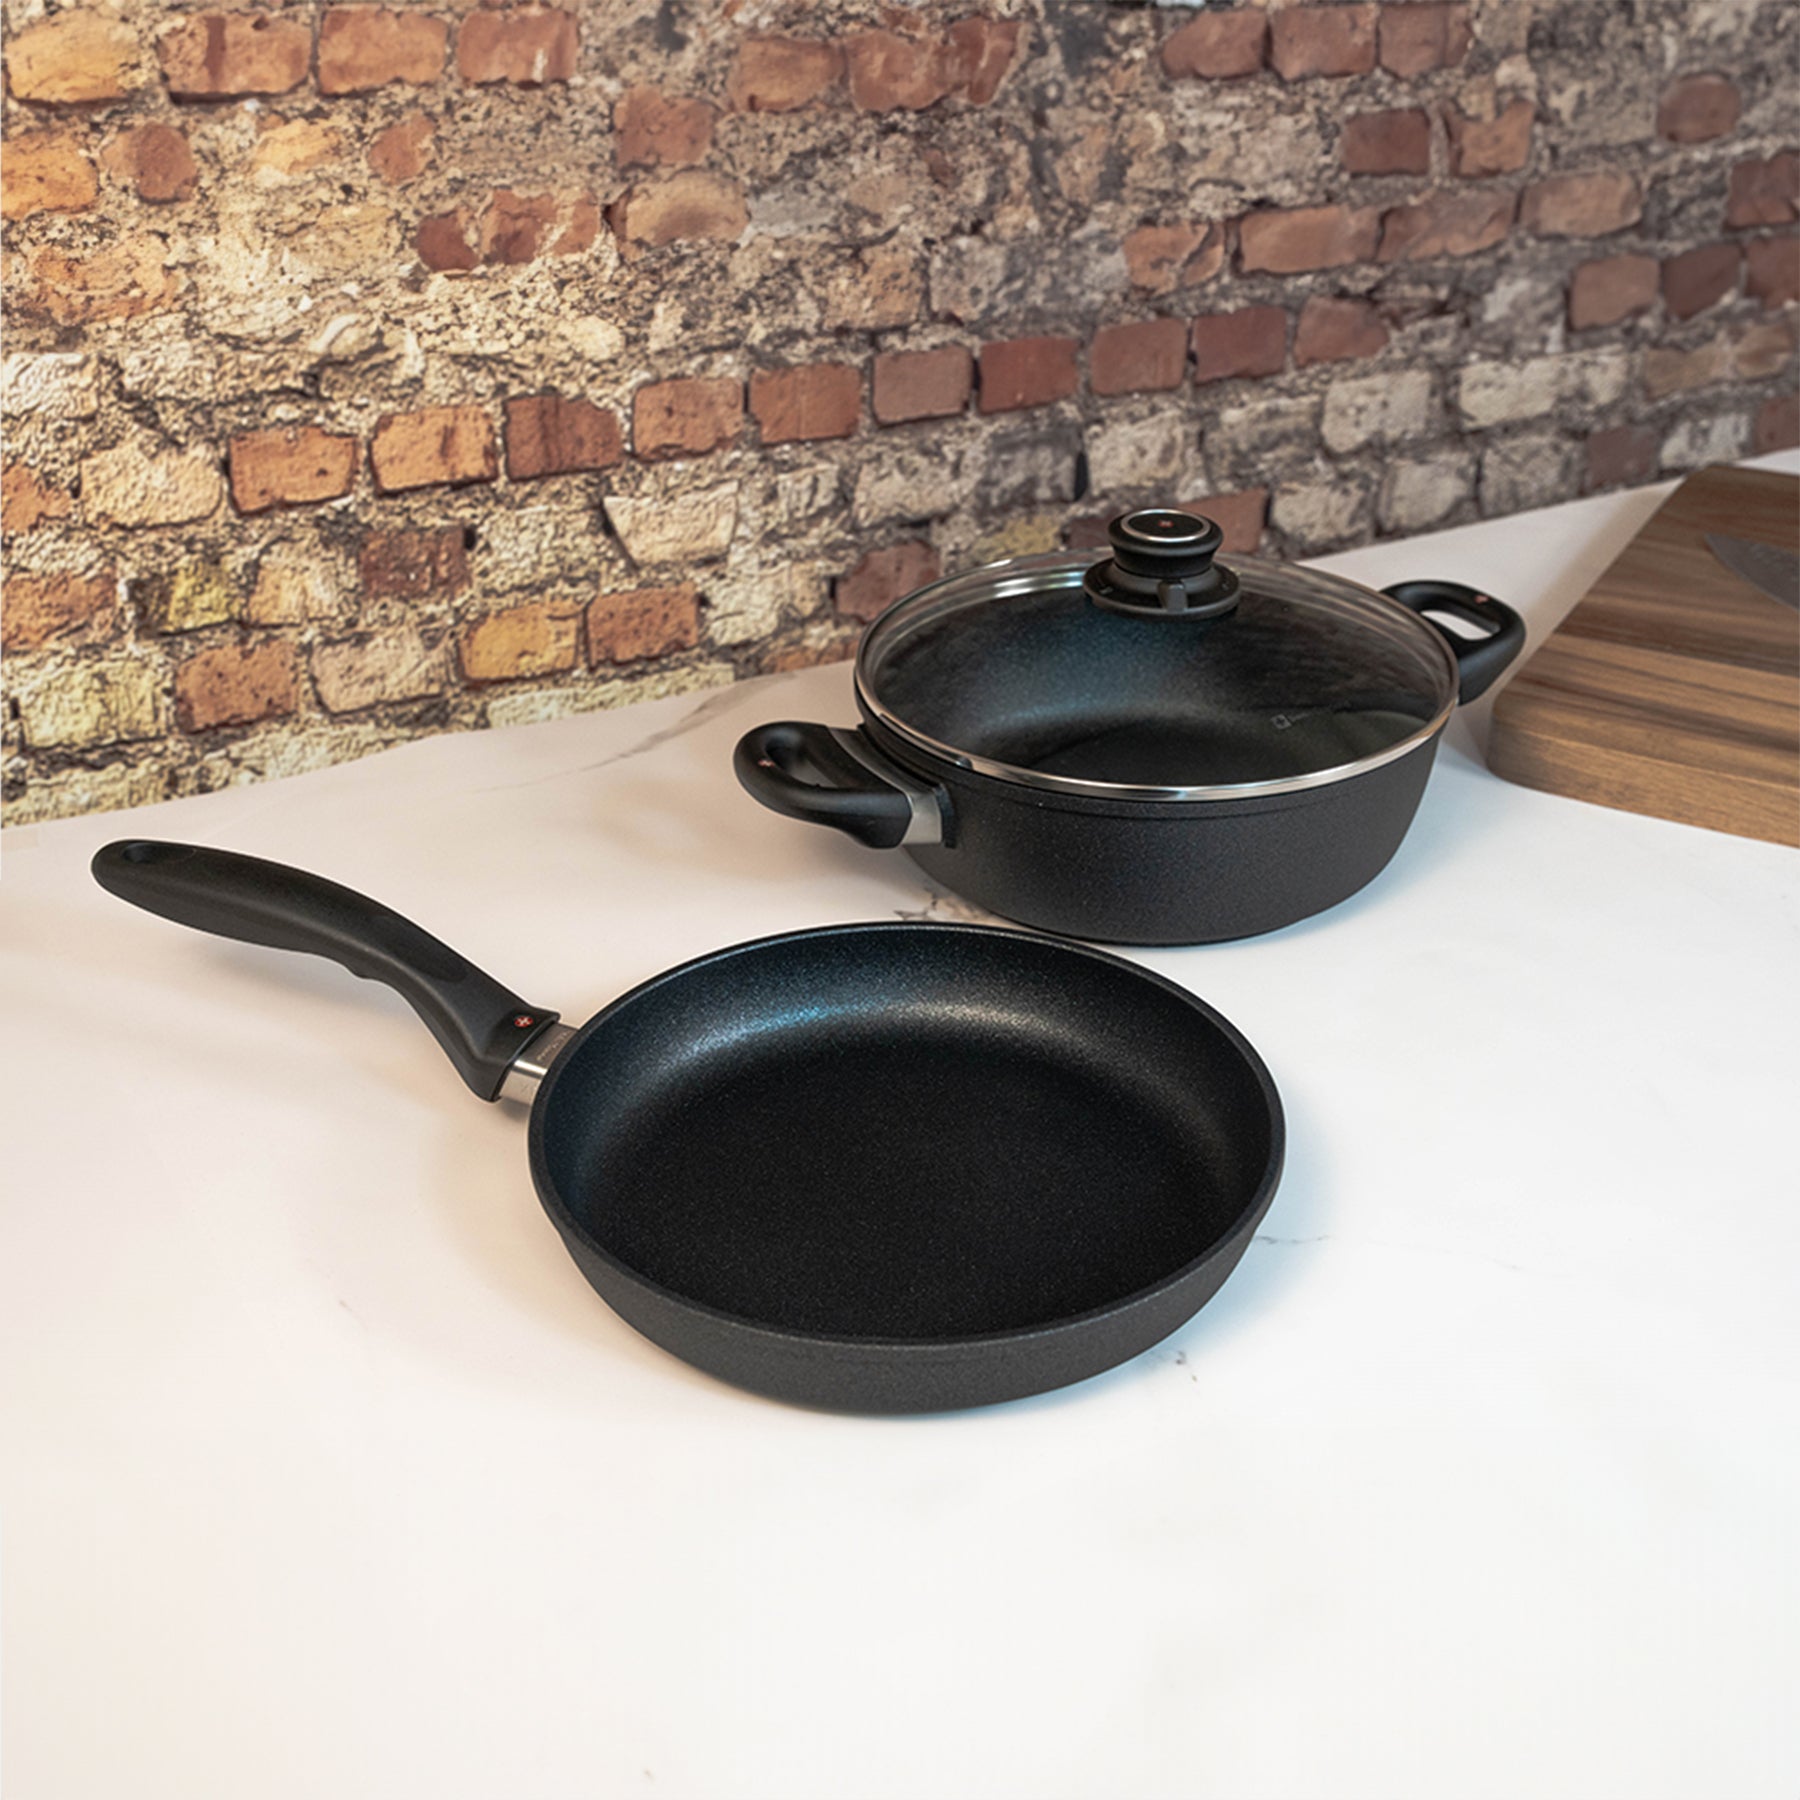 XD Nonstick 3-Piece Set - Fry Pan & Casserole on kitchen counter next to cutting board